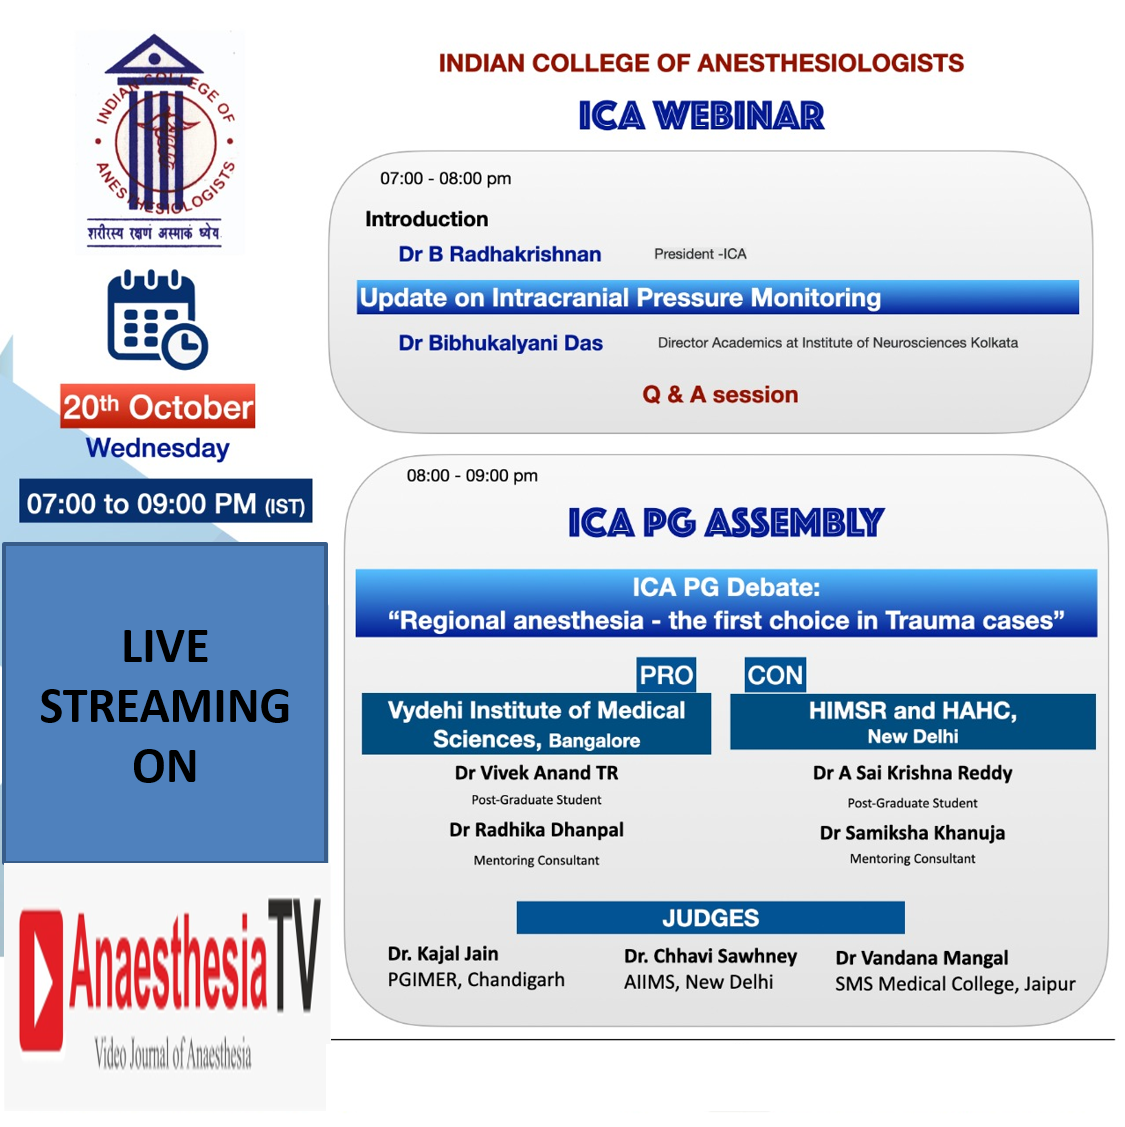 Update on Intracranial Pressure Monitoring and ICA PG Debate : Regional Anaesthesia – The first choice in Trauma cases